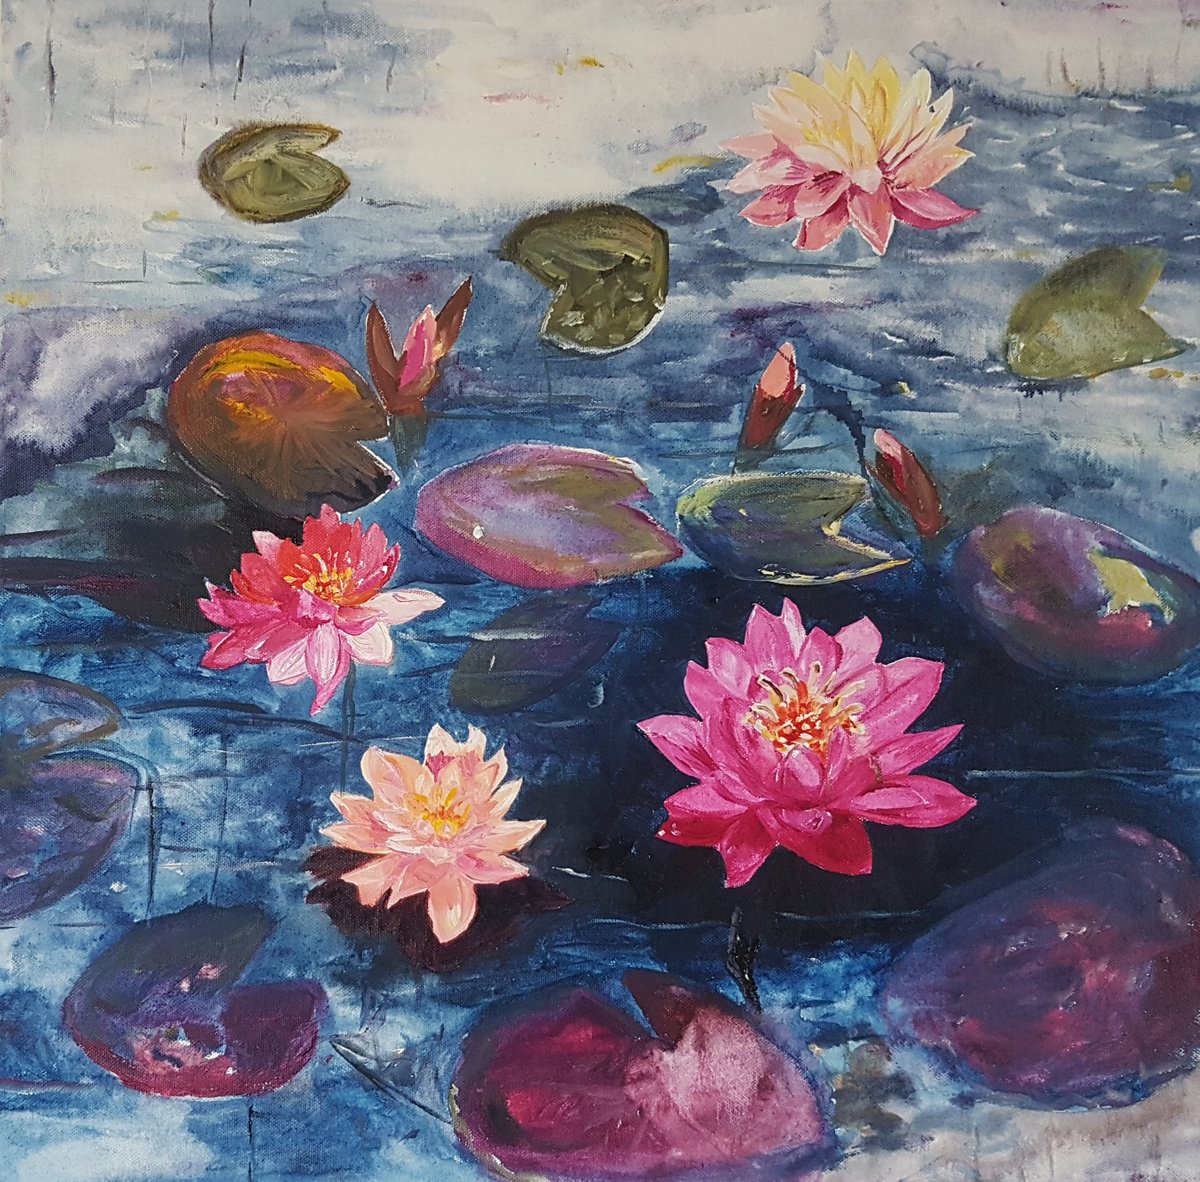 Water lilies: Like jewels on the water by Kathrin Flge